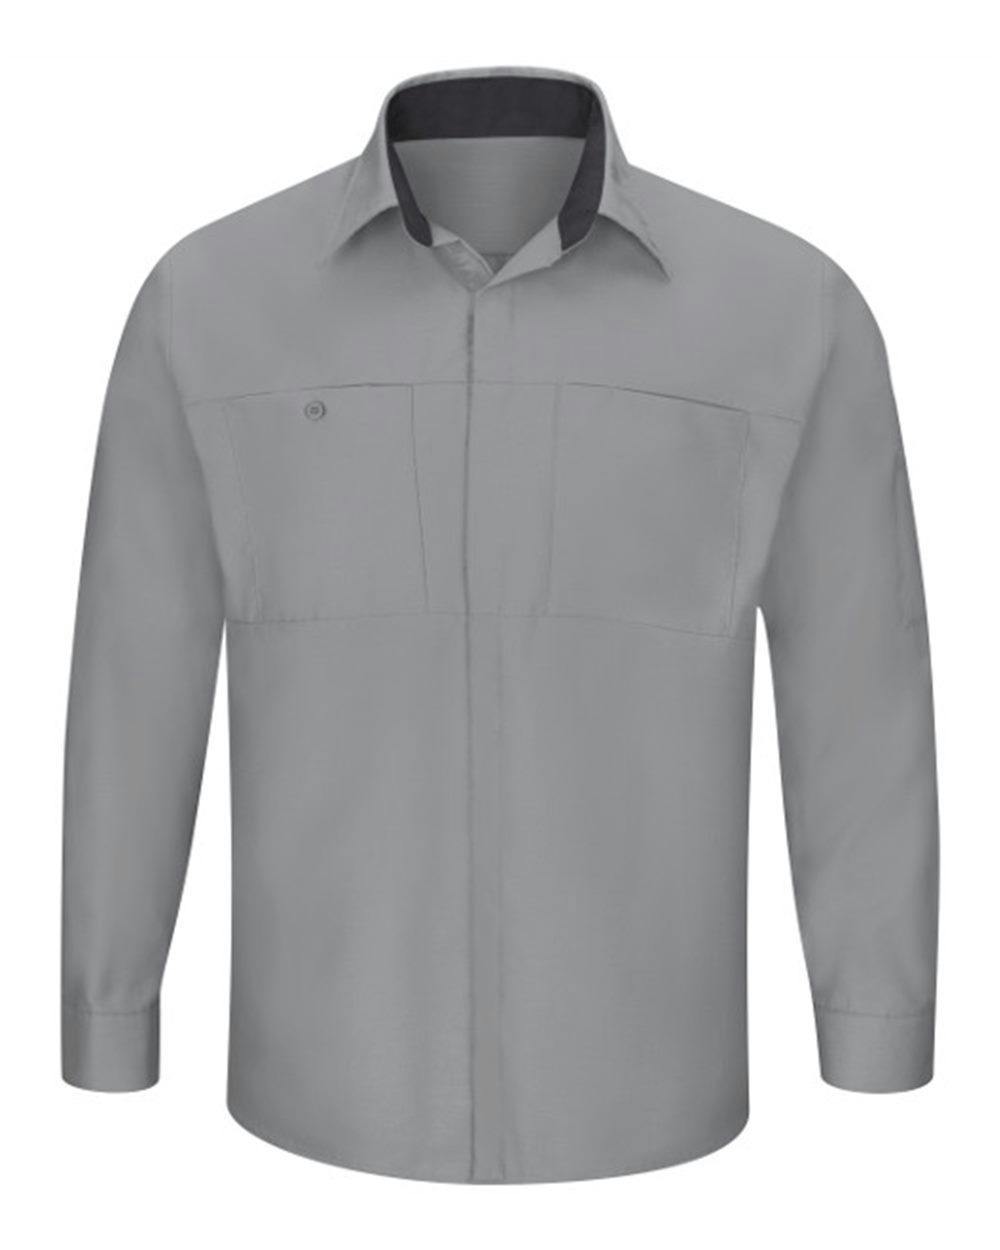 Image for Performance Plus Long Sleeve Shirt with OilBlok Technology - Tall Sizes - SY32T